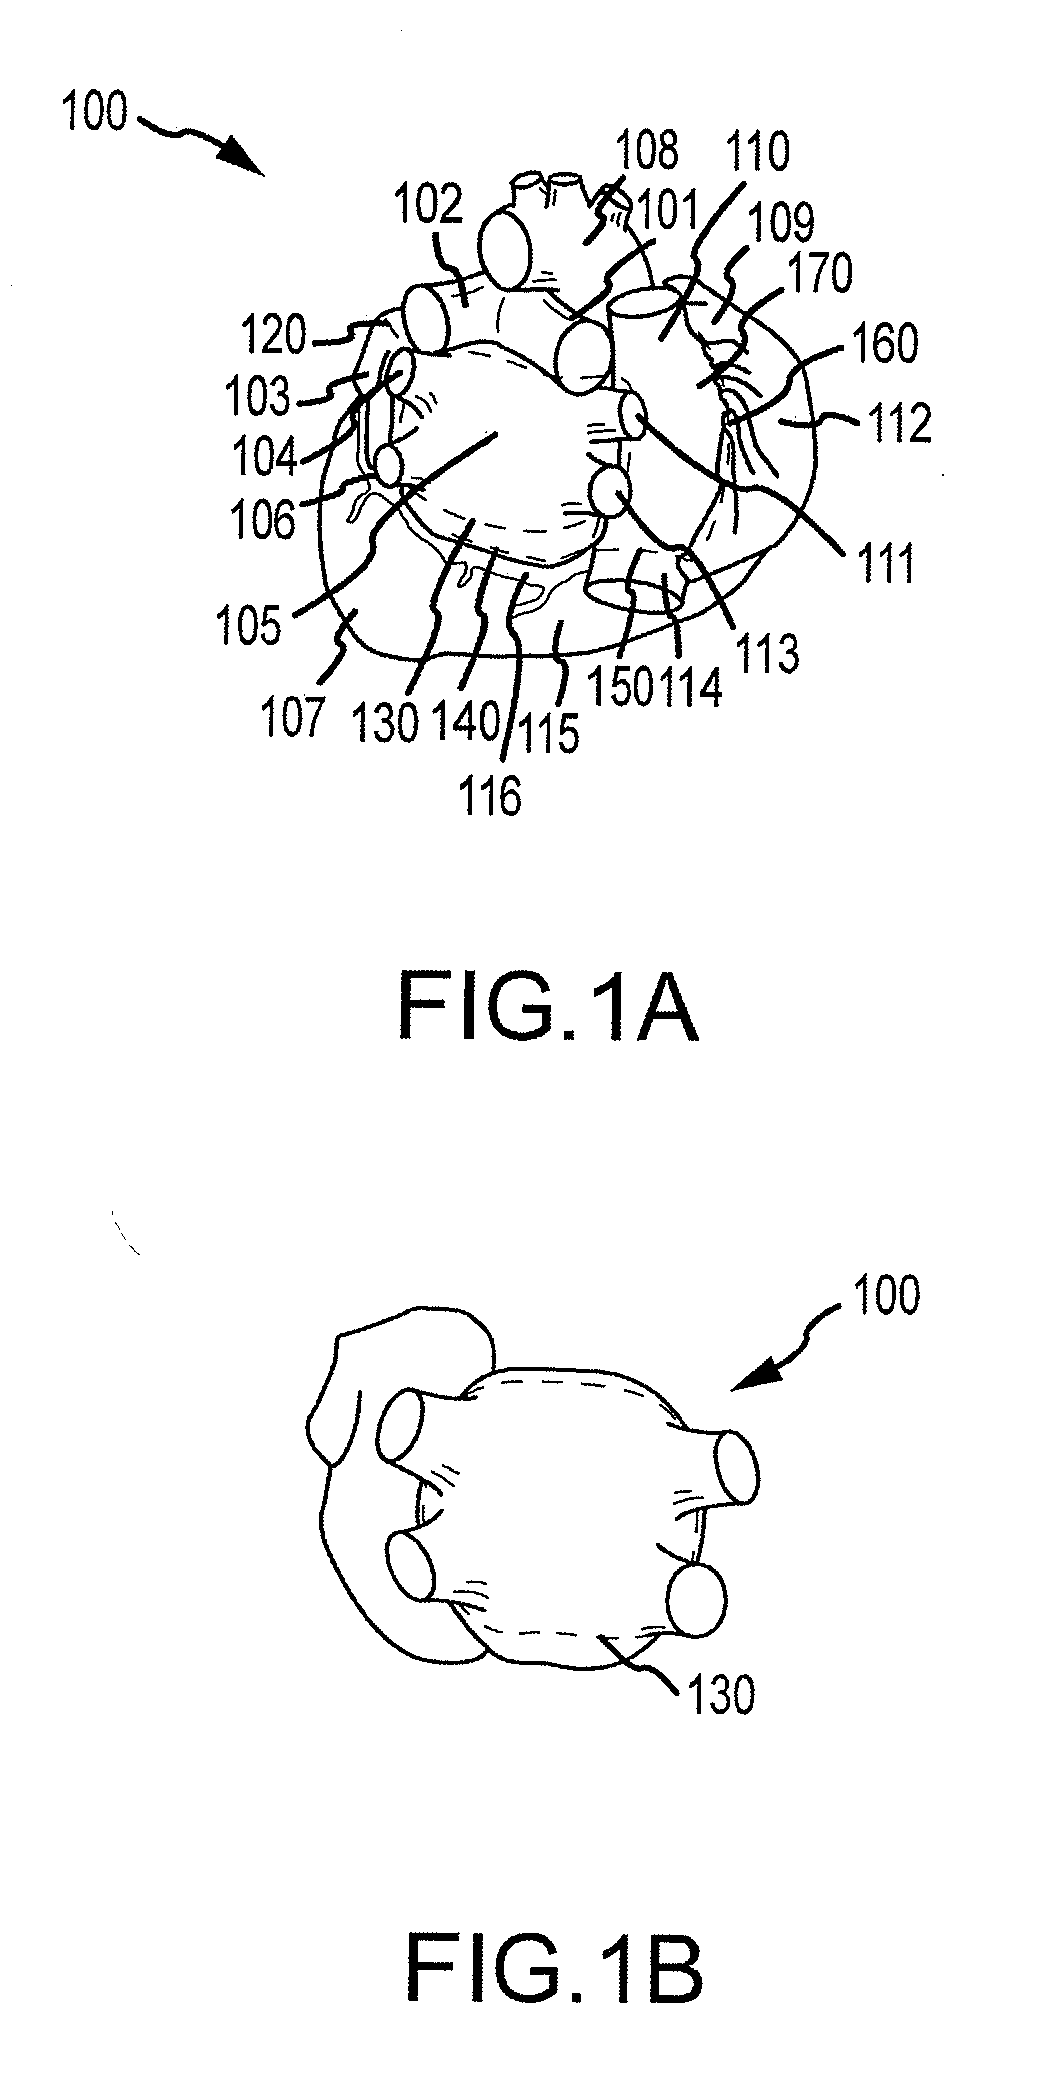 Cardiac ablation systems and methods